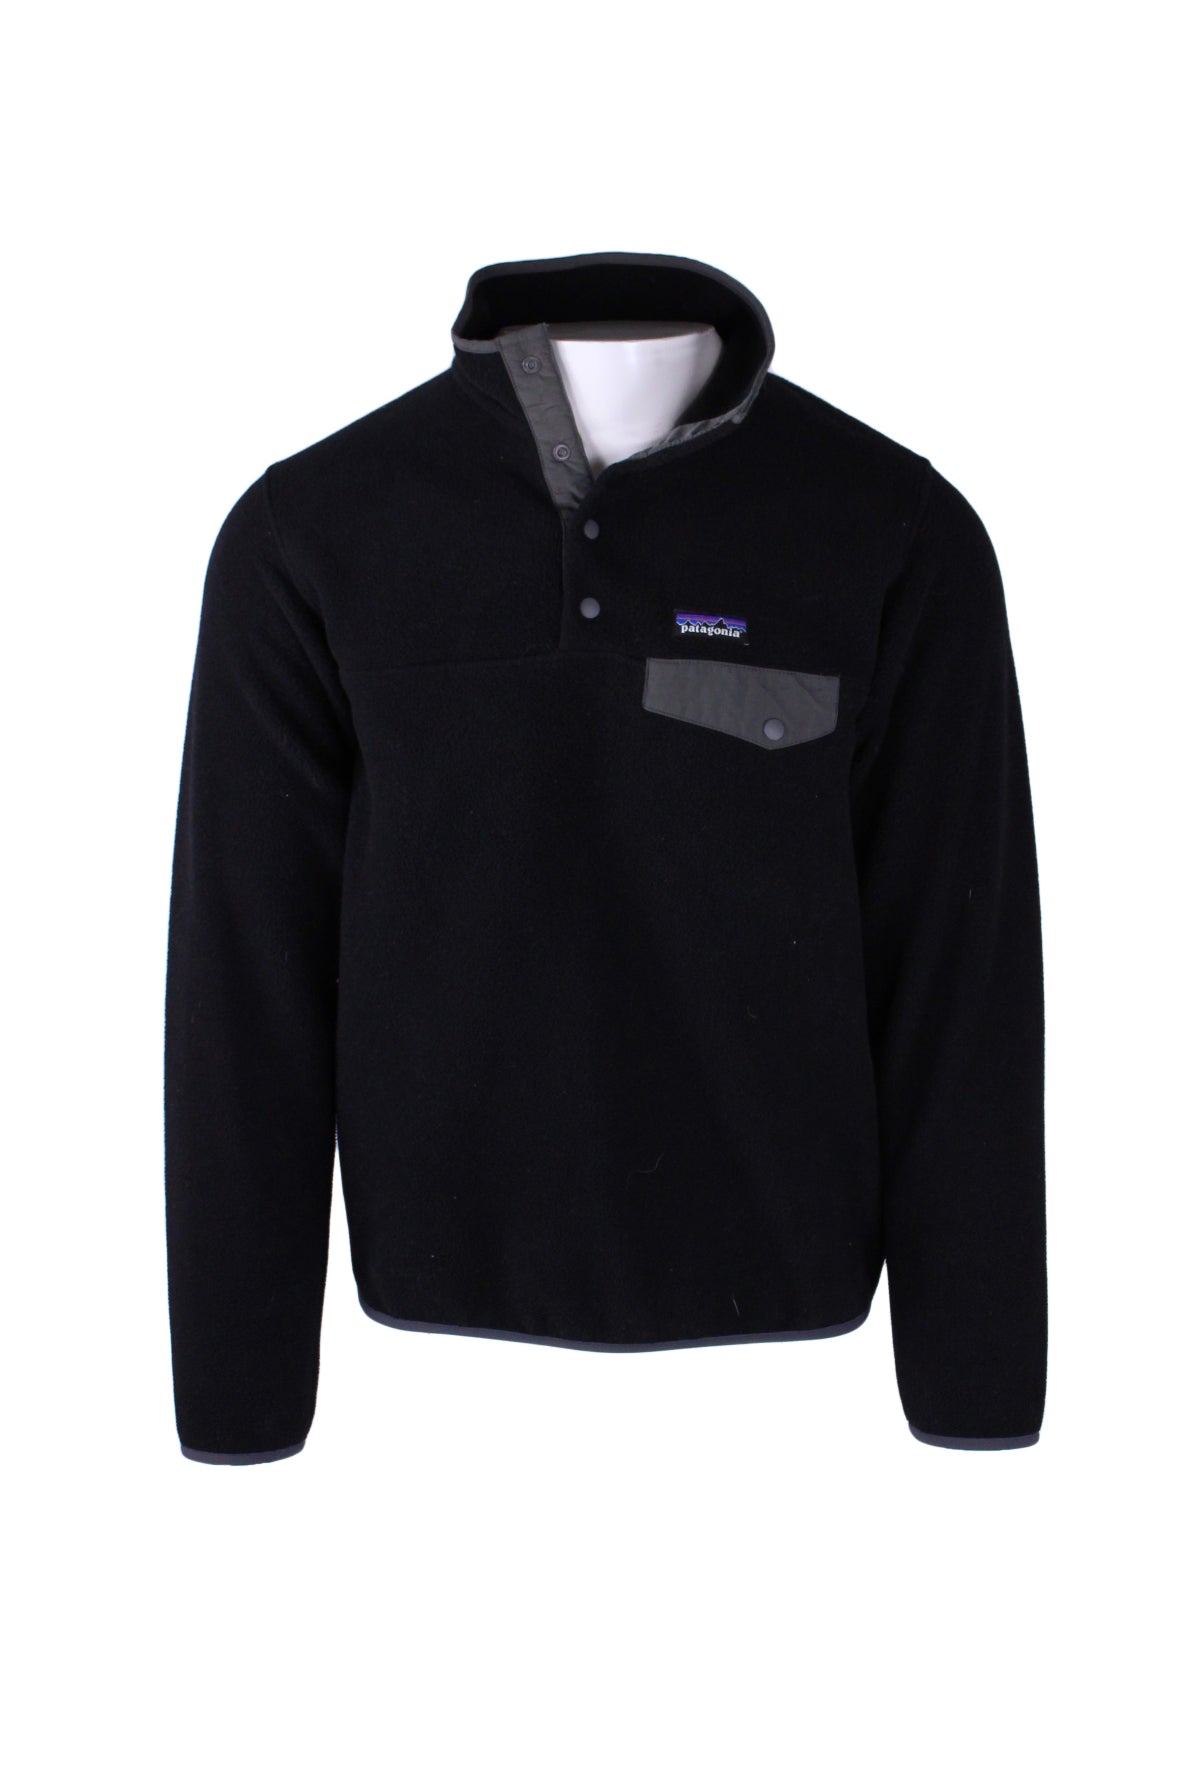 front angle of patagonia synchilla black fleece pull-over. features grey flap snap heart pocket, branded patch above pocket with text 'patagonia', stand up collar, four snap half placket, and grey piping.